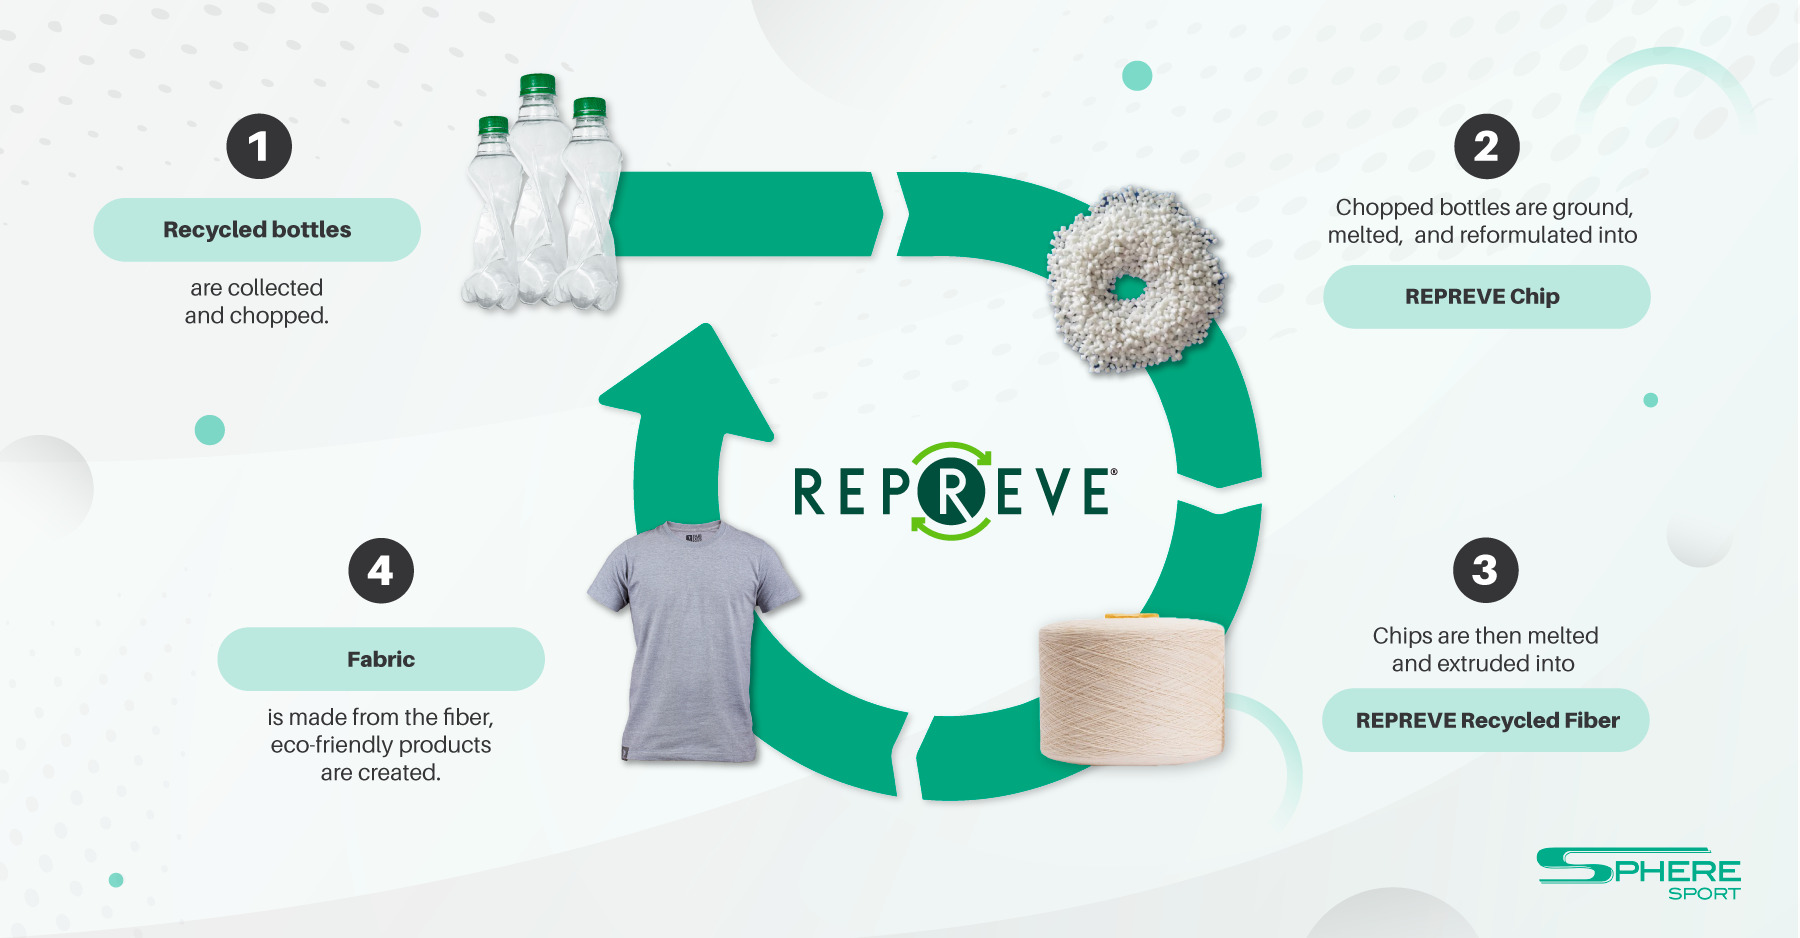 How Is REPREVE Fabric Made